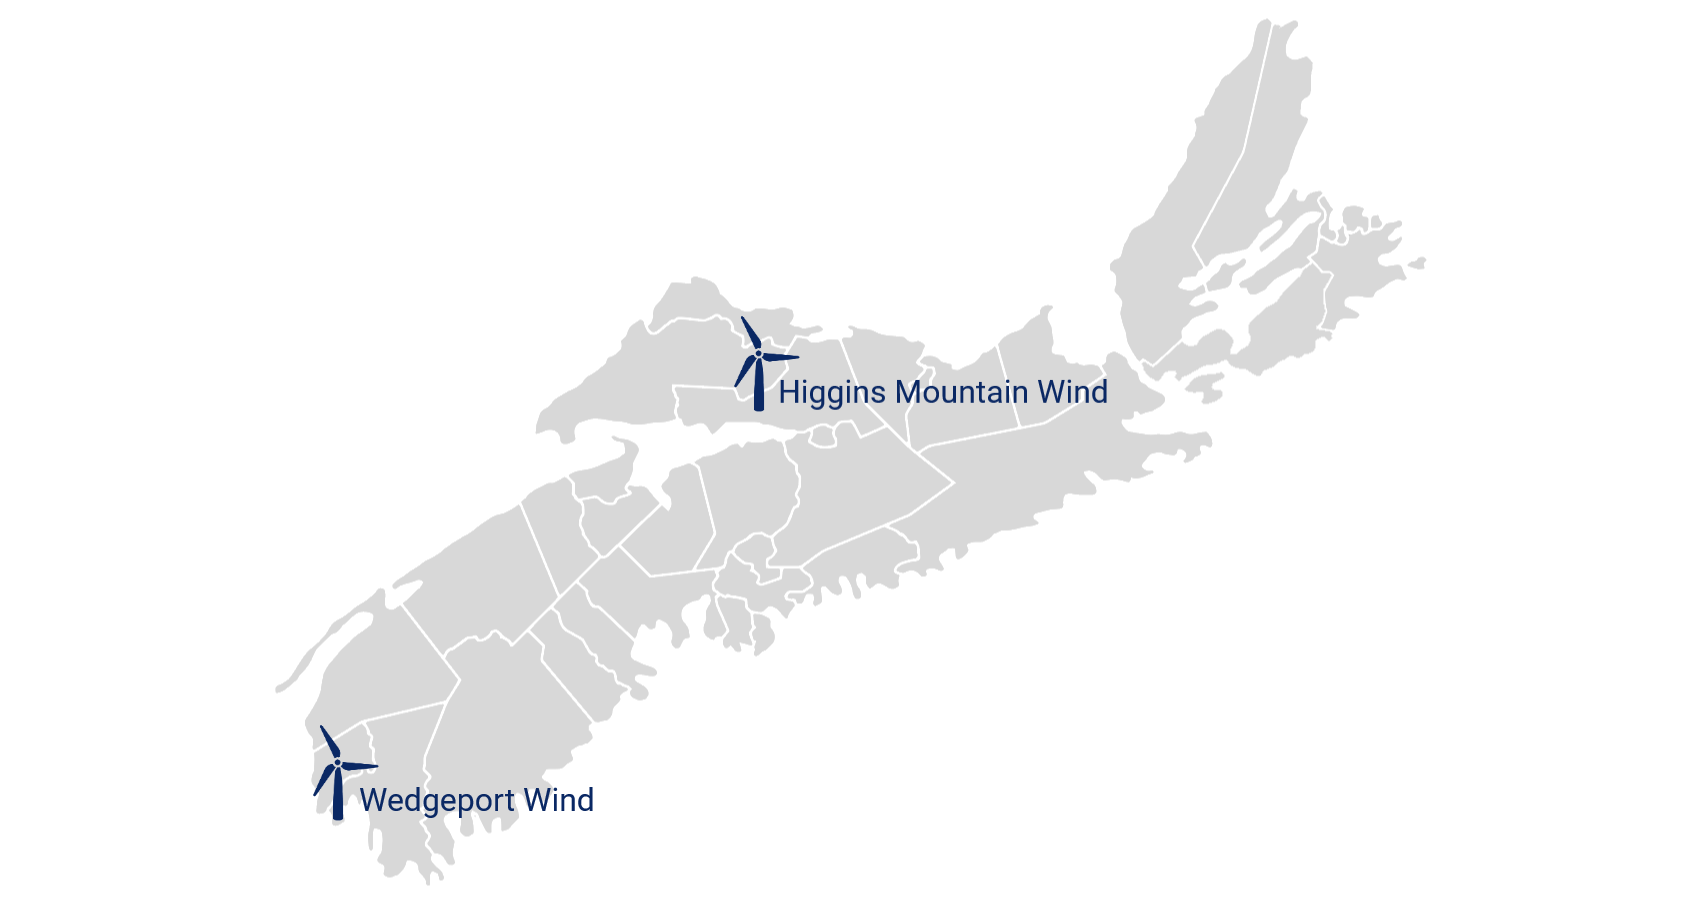 ELEMENTAL ENERGY AND PARTNERS SUCCESSFULLY OBTAIN ENVIRONMENTAL ASSESSMENT APPROVALS FOR TWO NOVA SCOTIA WIND ENERGY PROJECTS